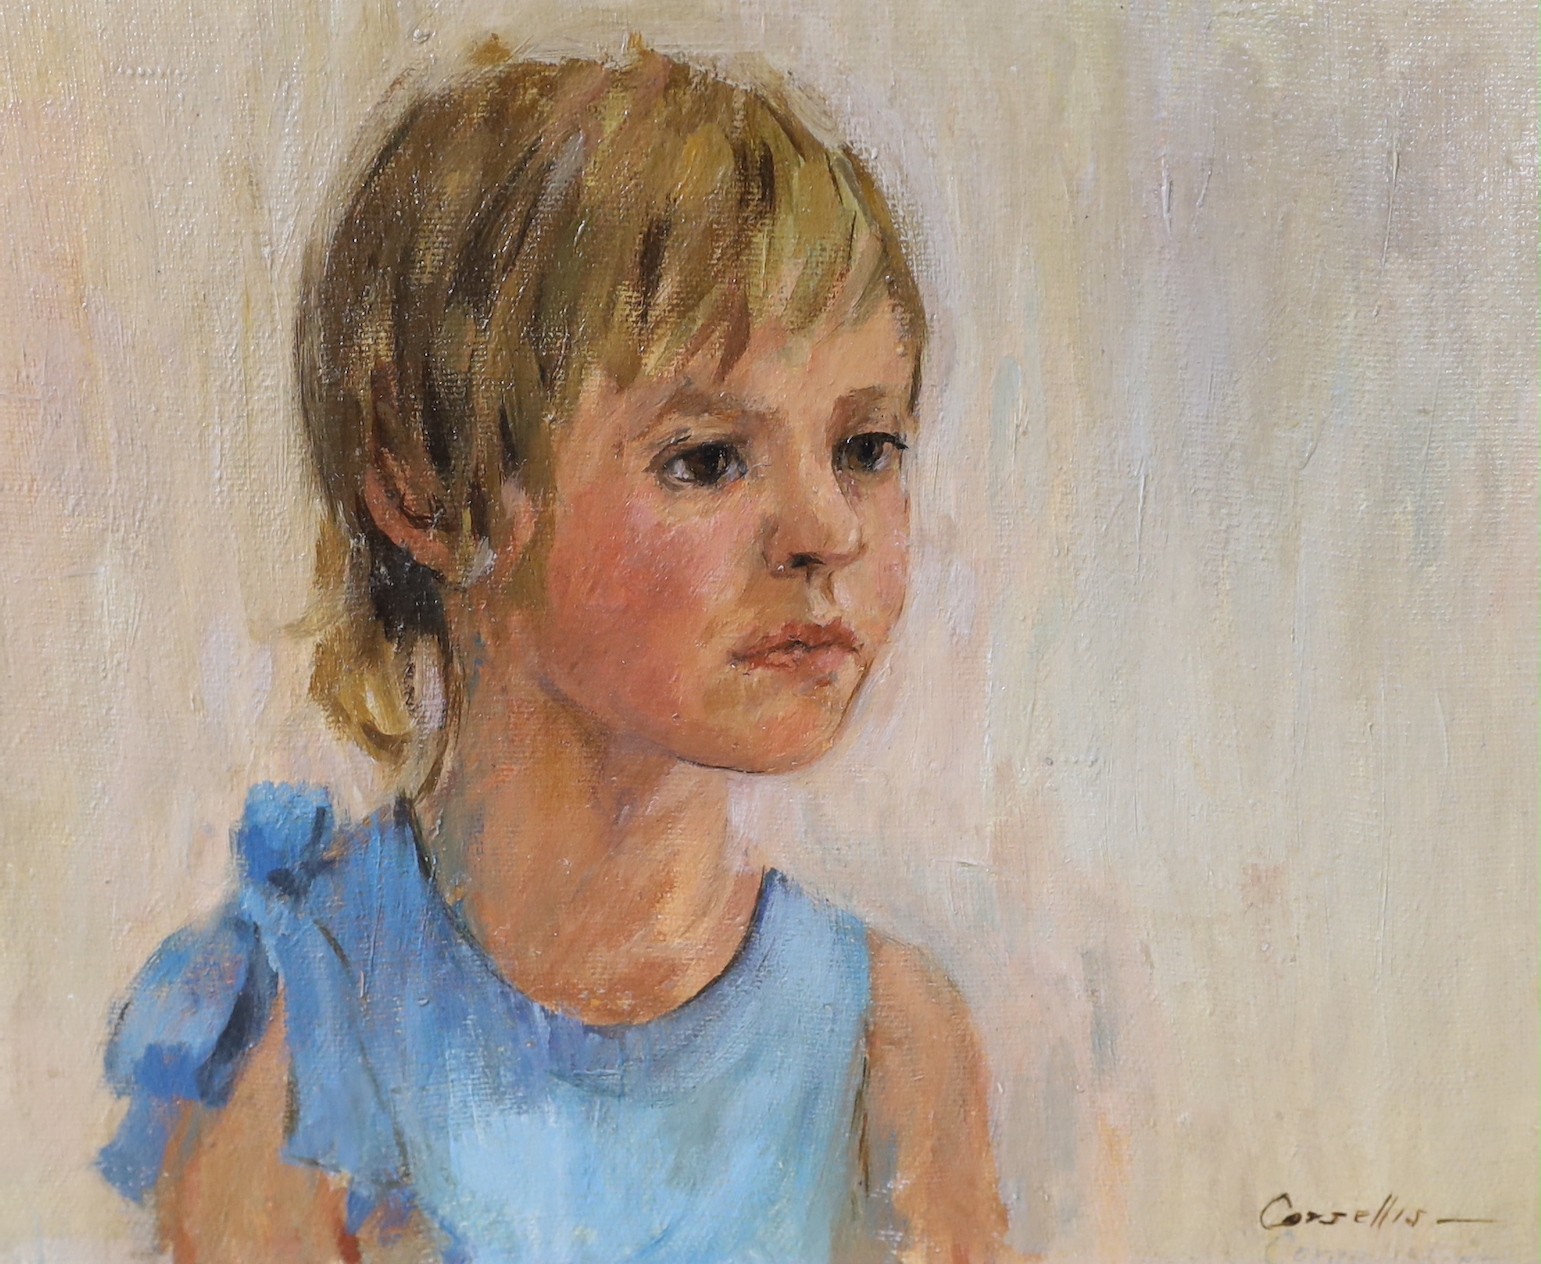 June Corsellis (b.1940), oil on canvas, Girl in a blue dress, signed, 20 x 25cm, unframed                                                                                                                                   